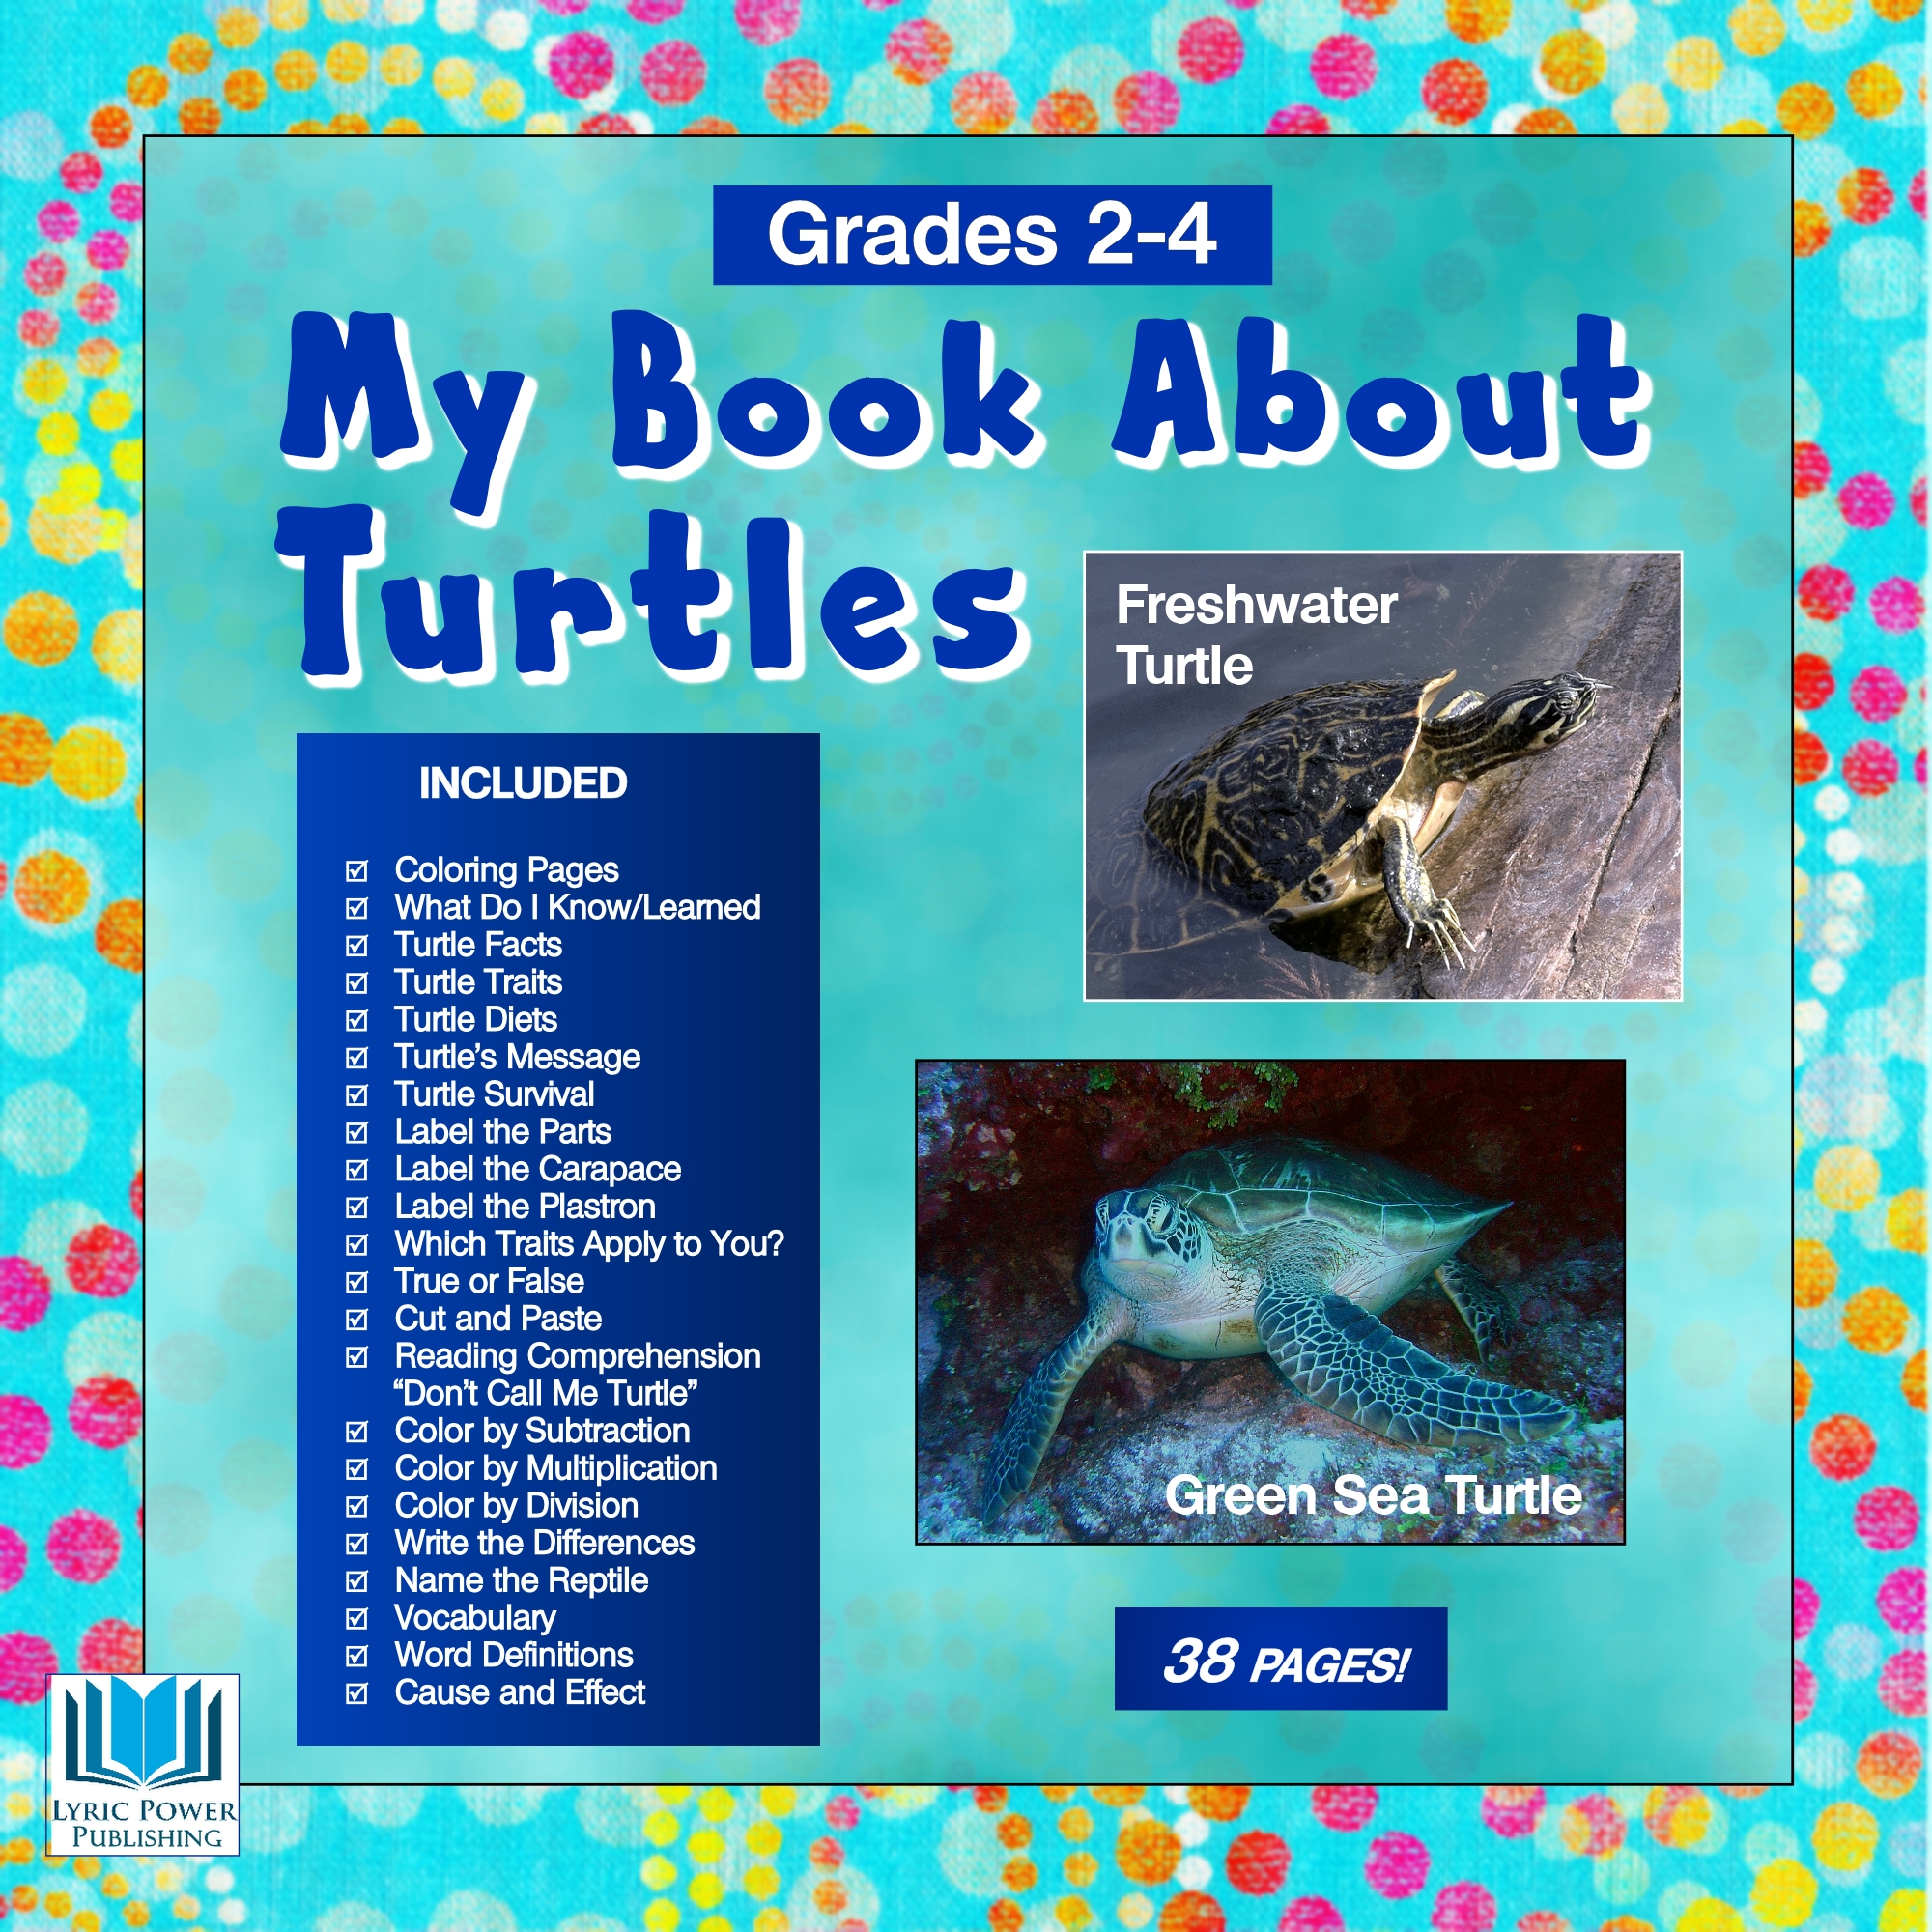 A light blue book cover with images of freshwater turtle and green sea turtle